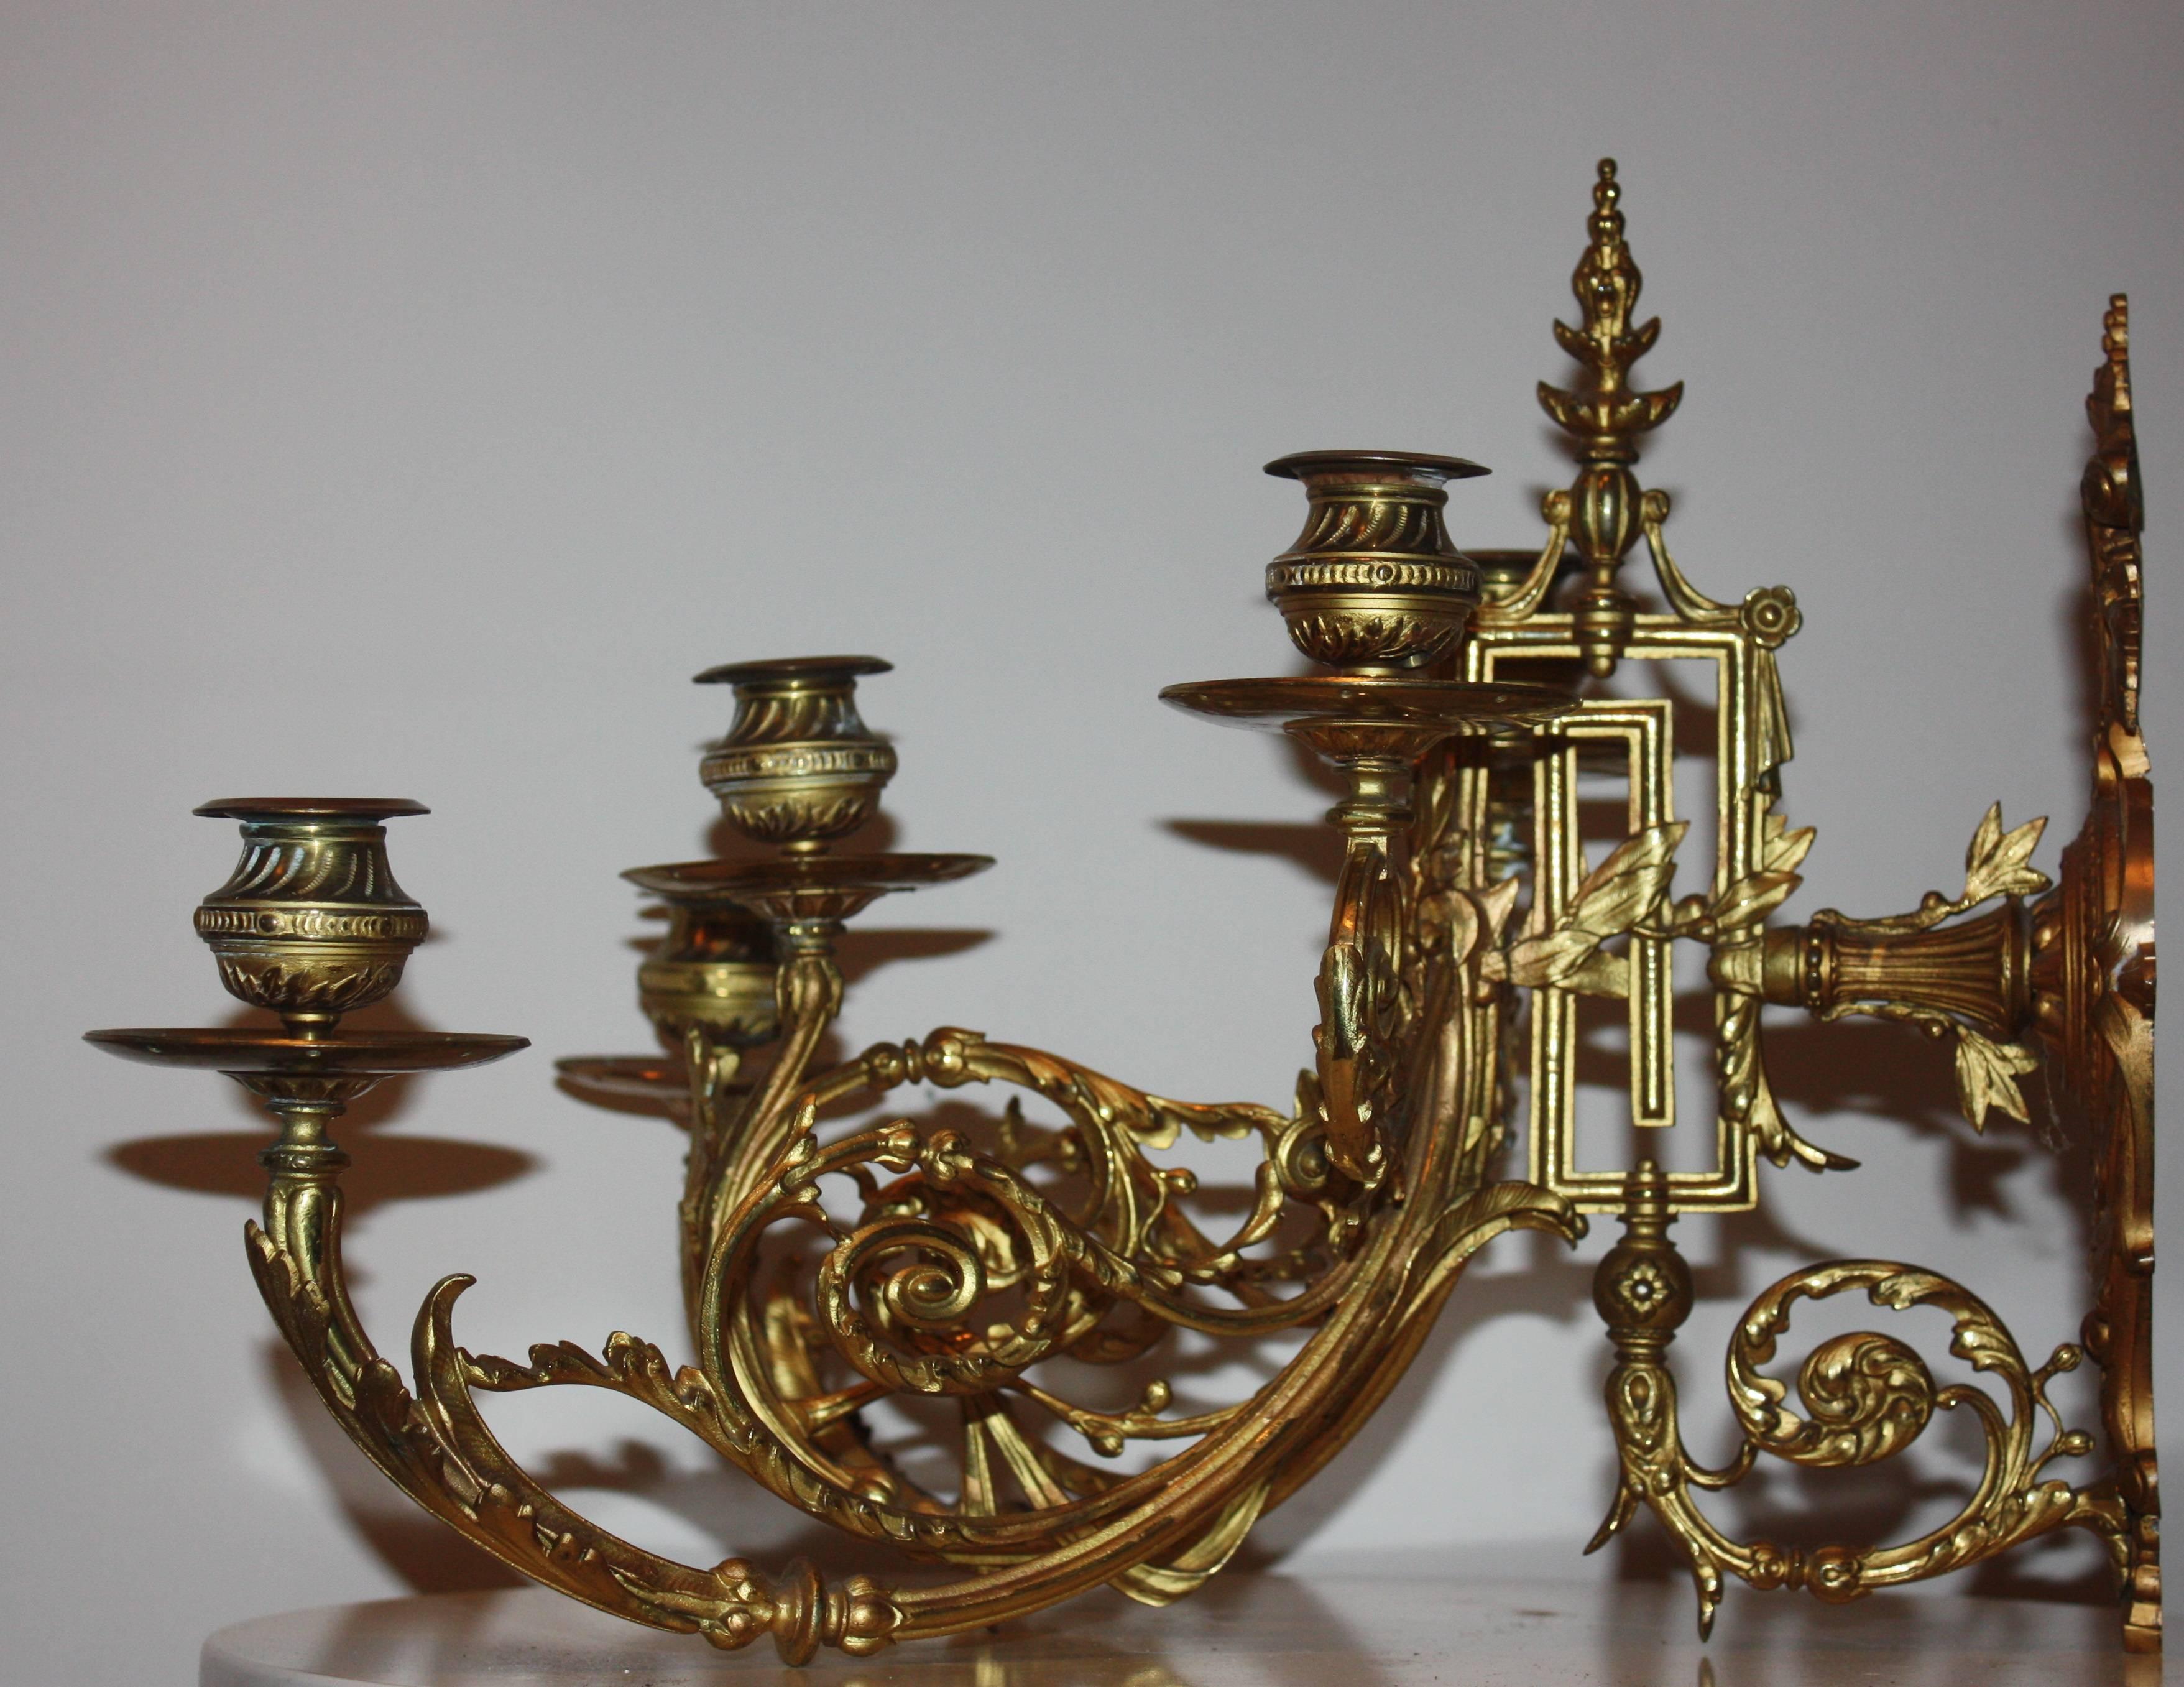 Rare antique five-light wall sconce, gilt bronze in the Emire style, France, circa 1870s.
Can be rewired.

  